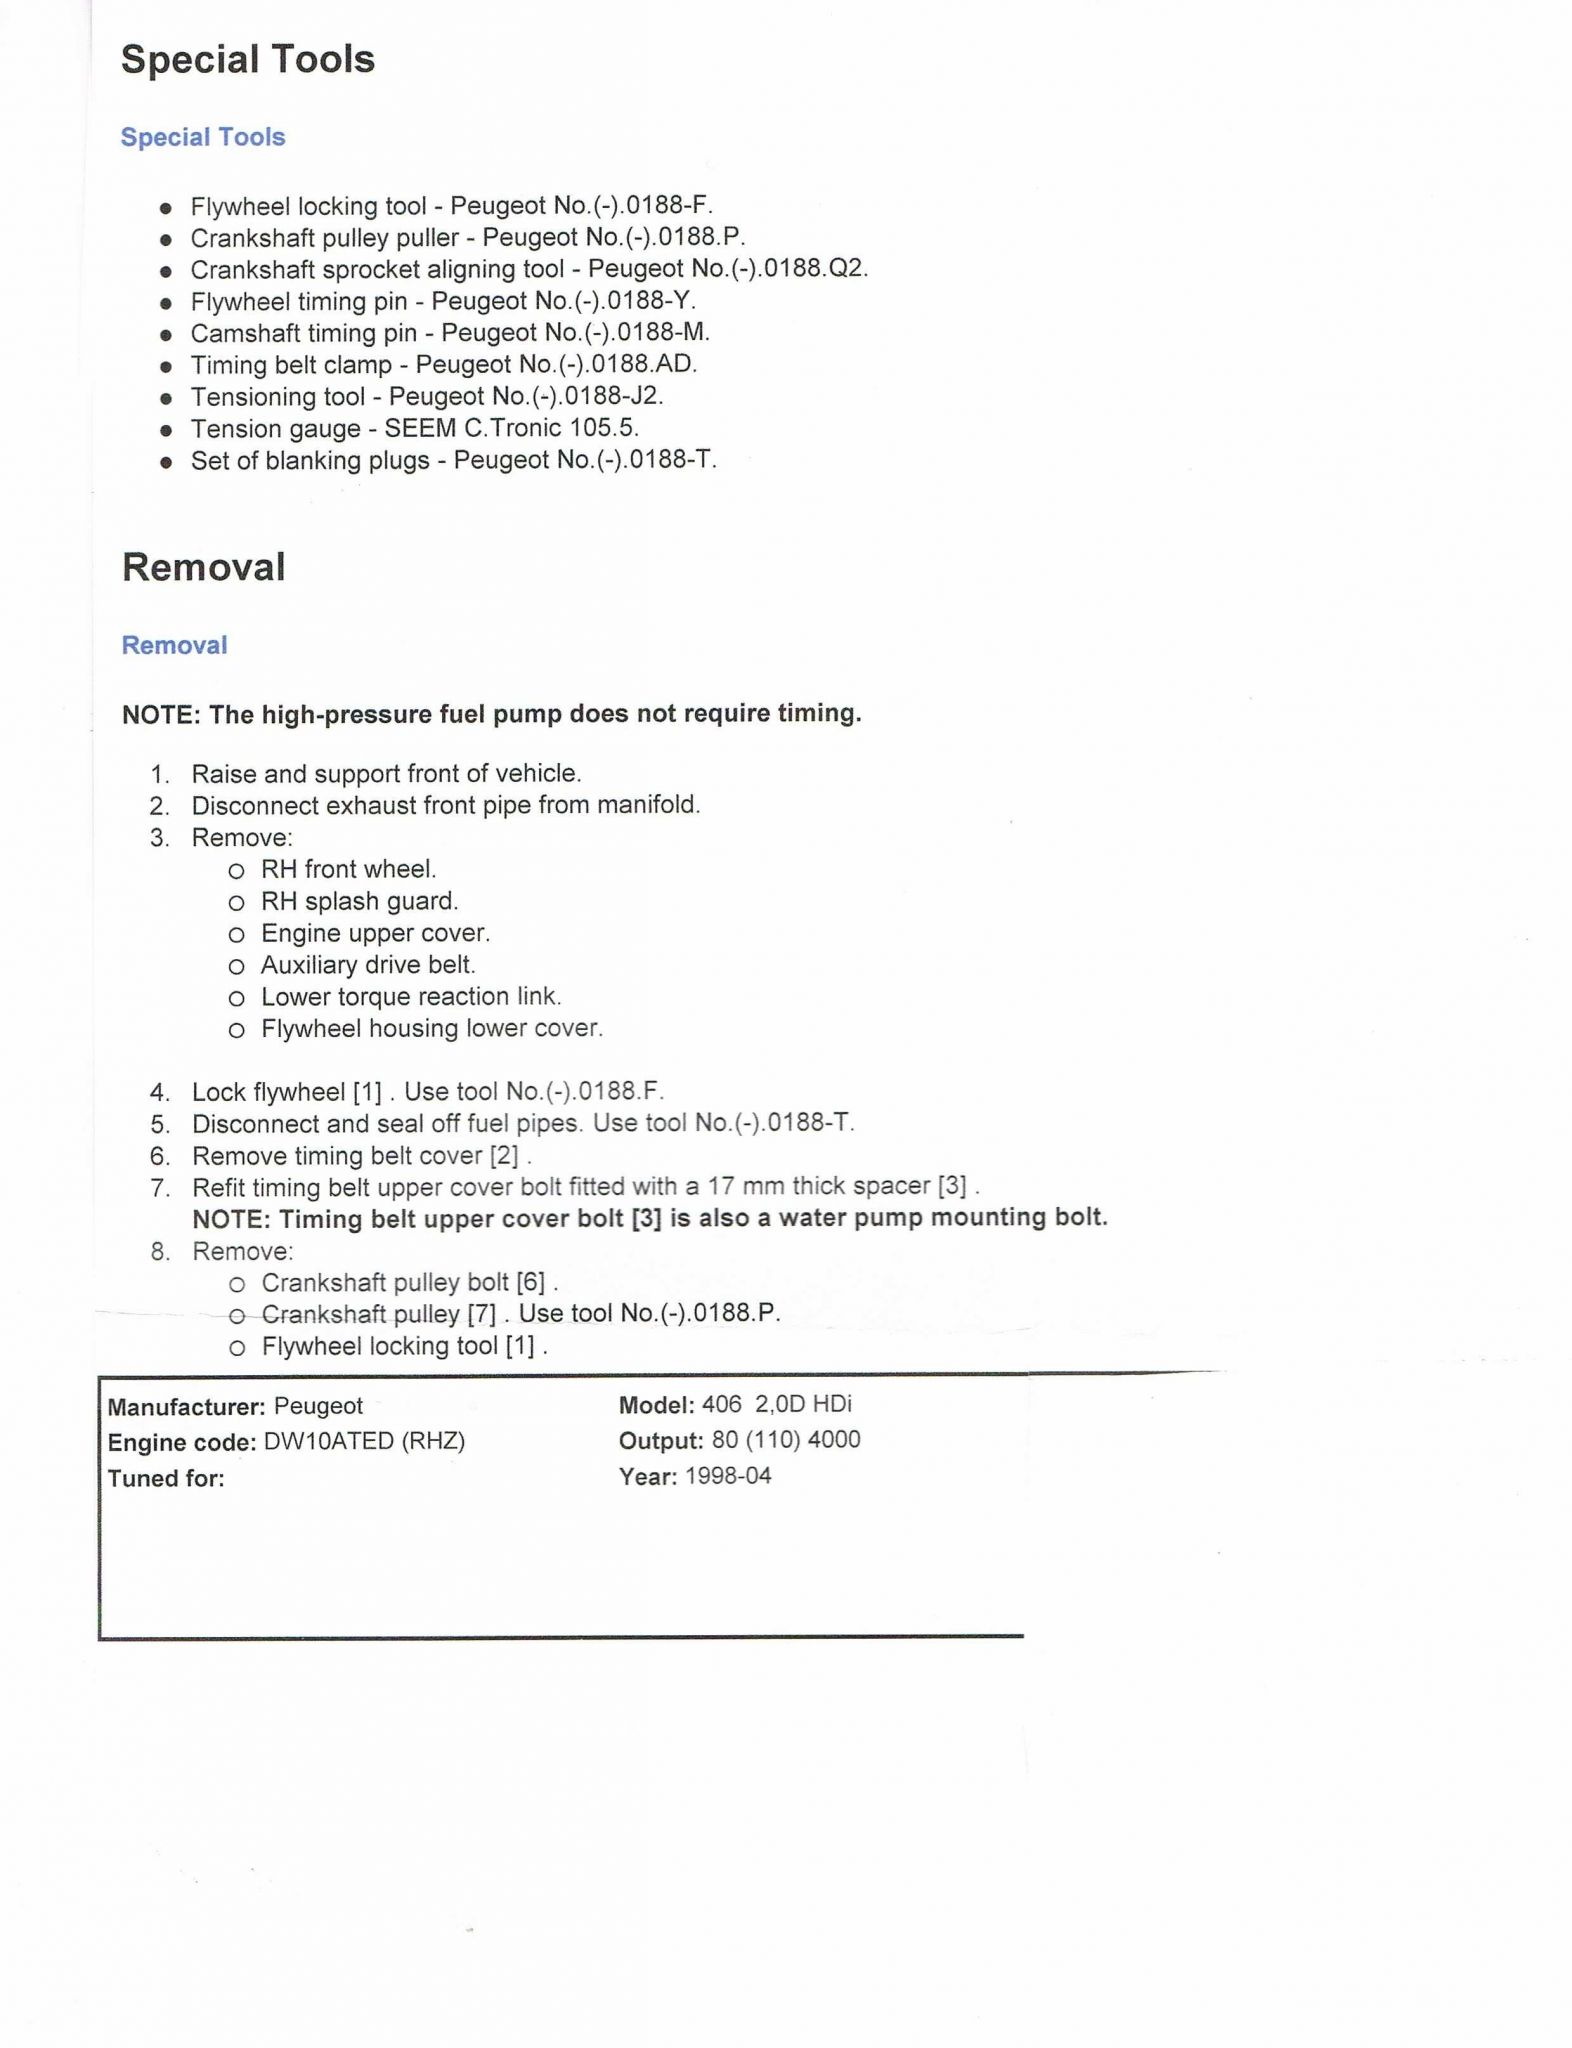 Personal Use Of Company Vehicle Worksheet 2016 and Resume Templates 2016 Inspirational Culinary Resume by Breanna